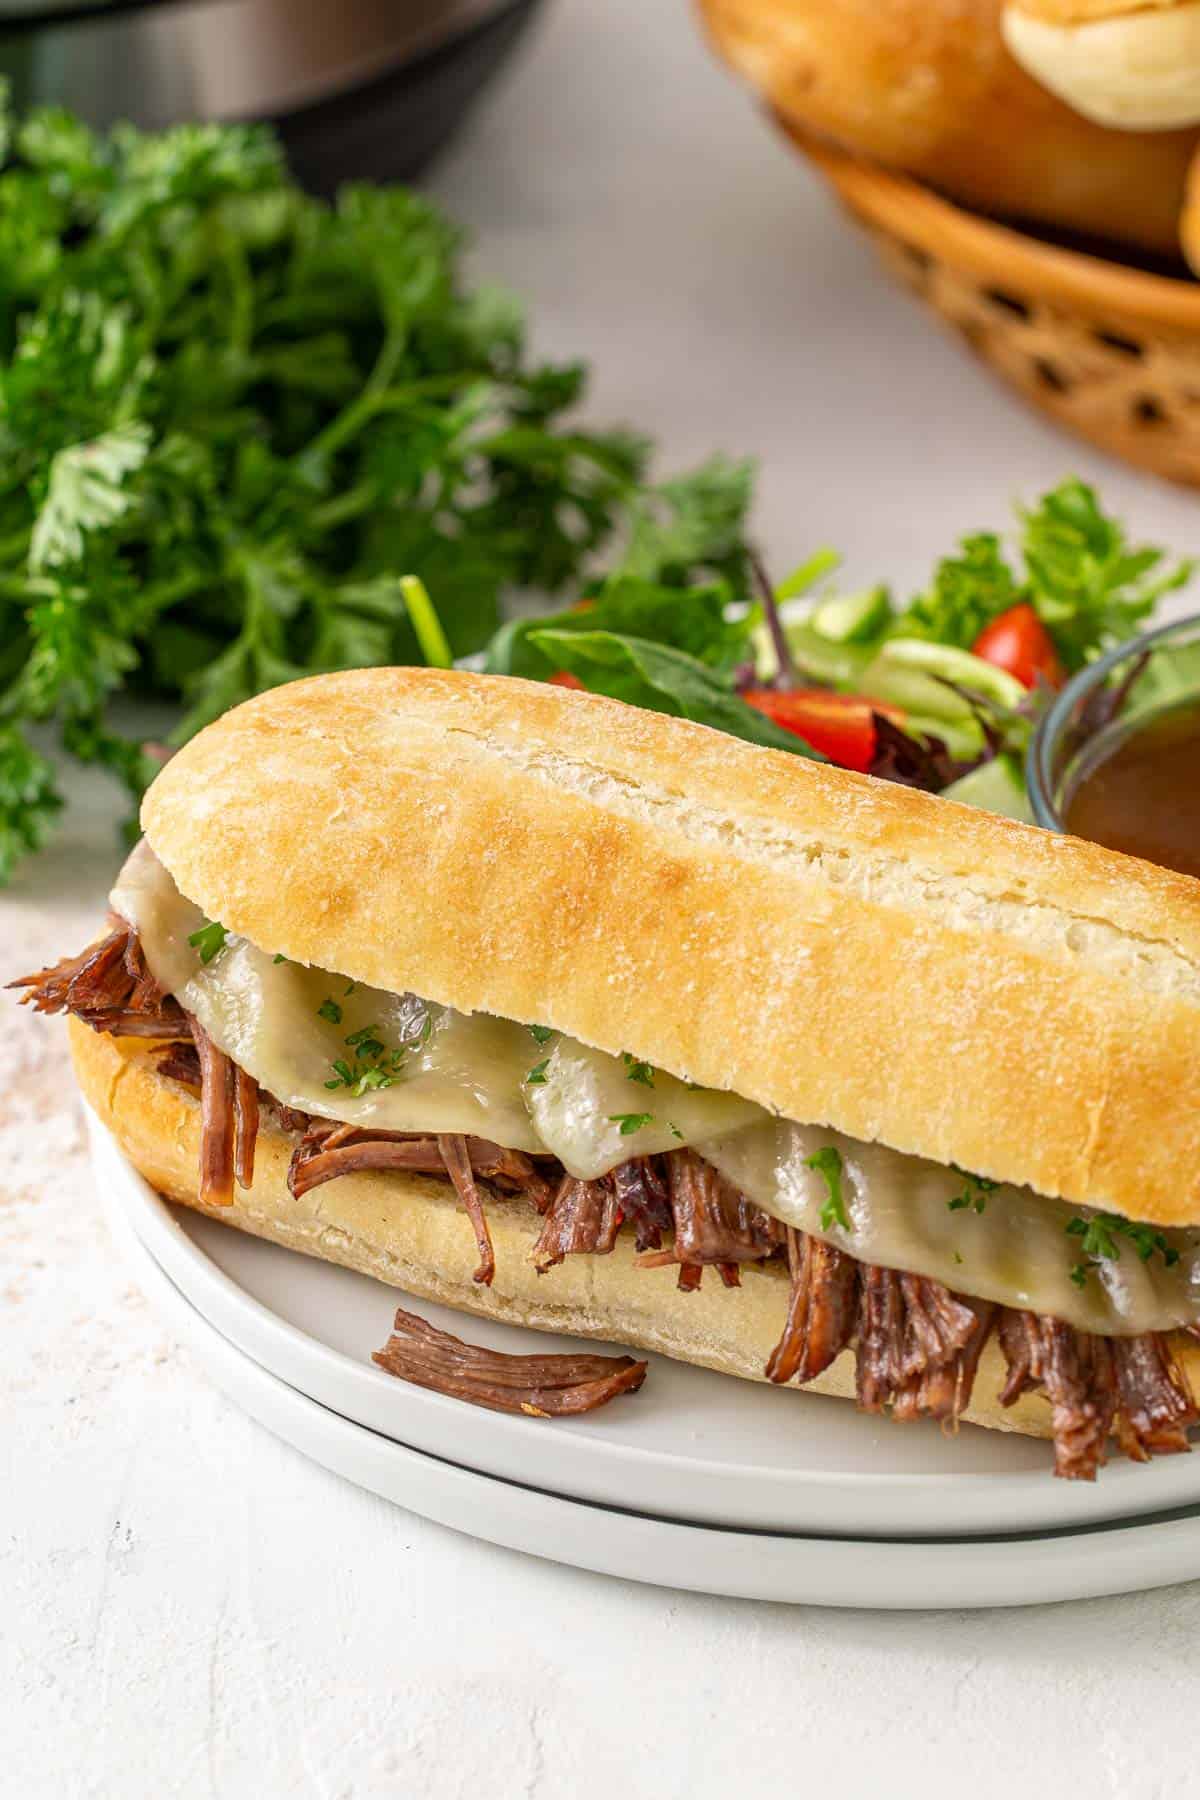 Angled view of a French dip sandwich on a white plate with a bowl of au jus and a garden salad.